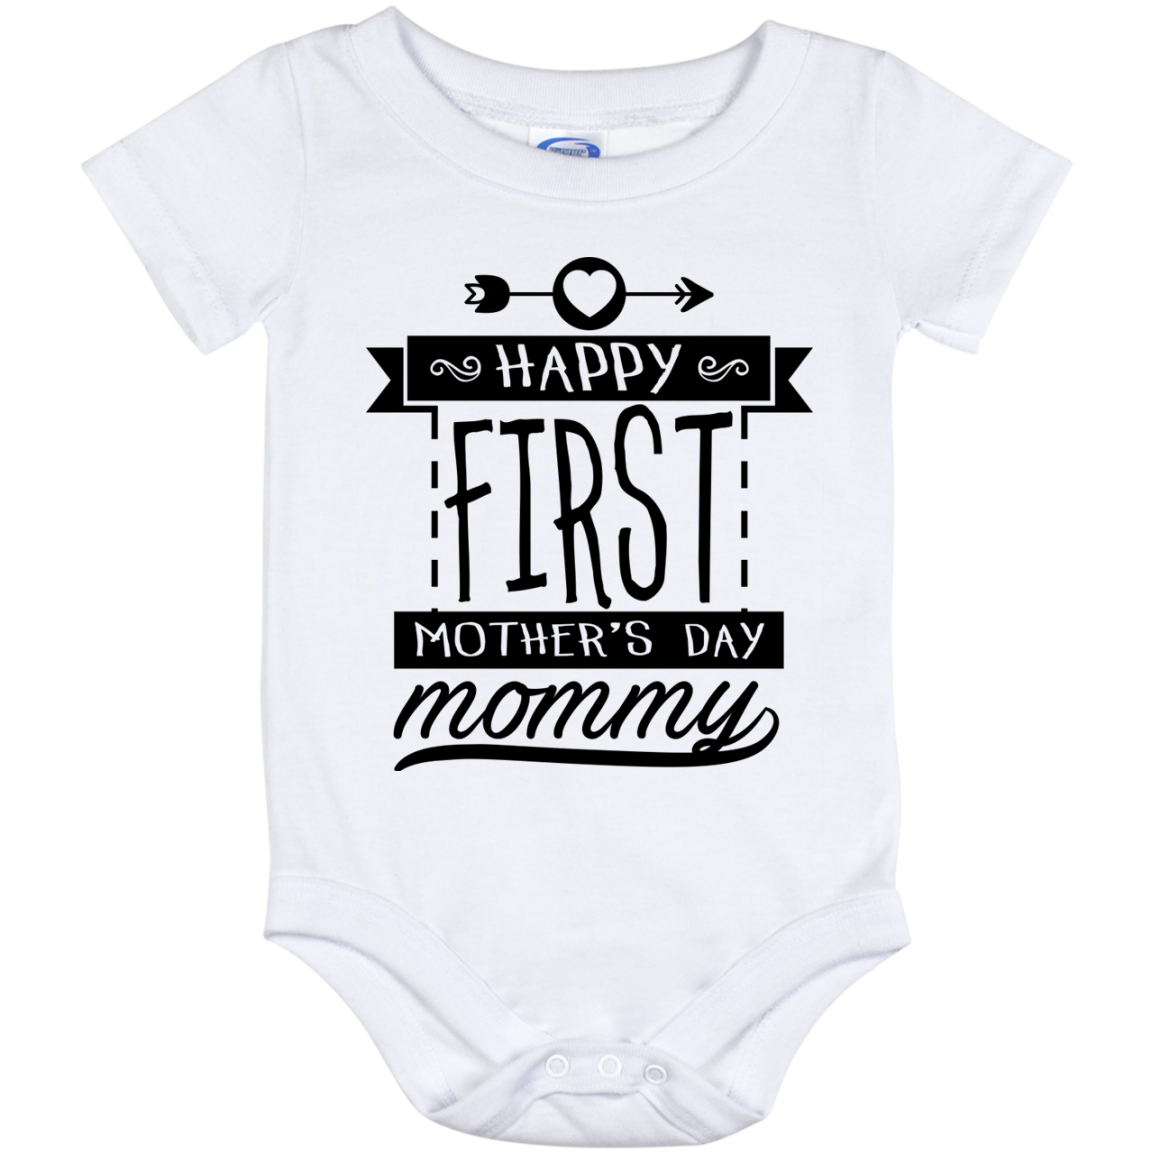 Happy First Mother’S Day Mommy – Baby Onesie 6,12, 24 Month – Teeever